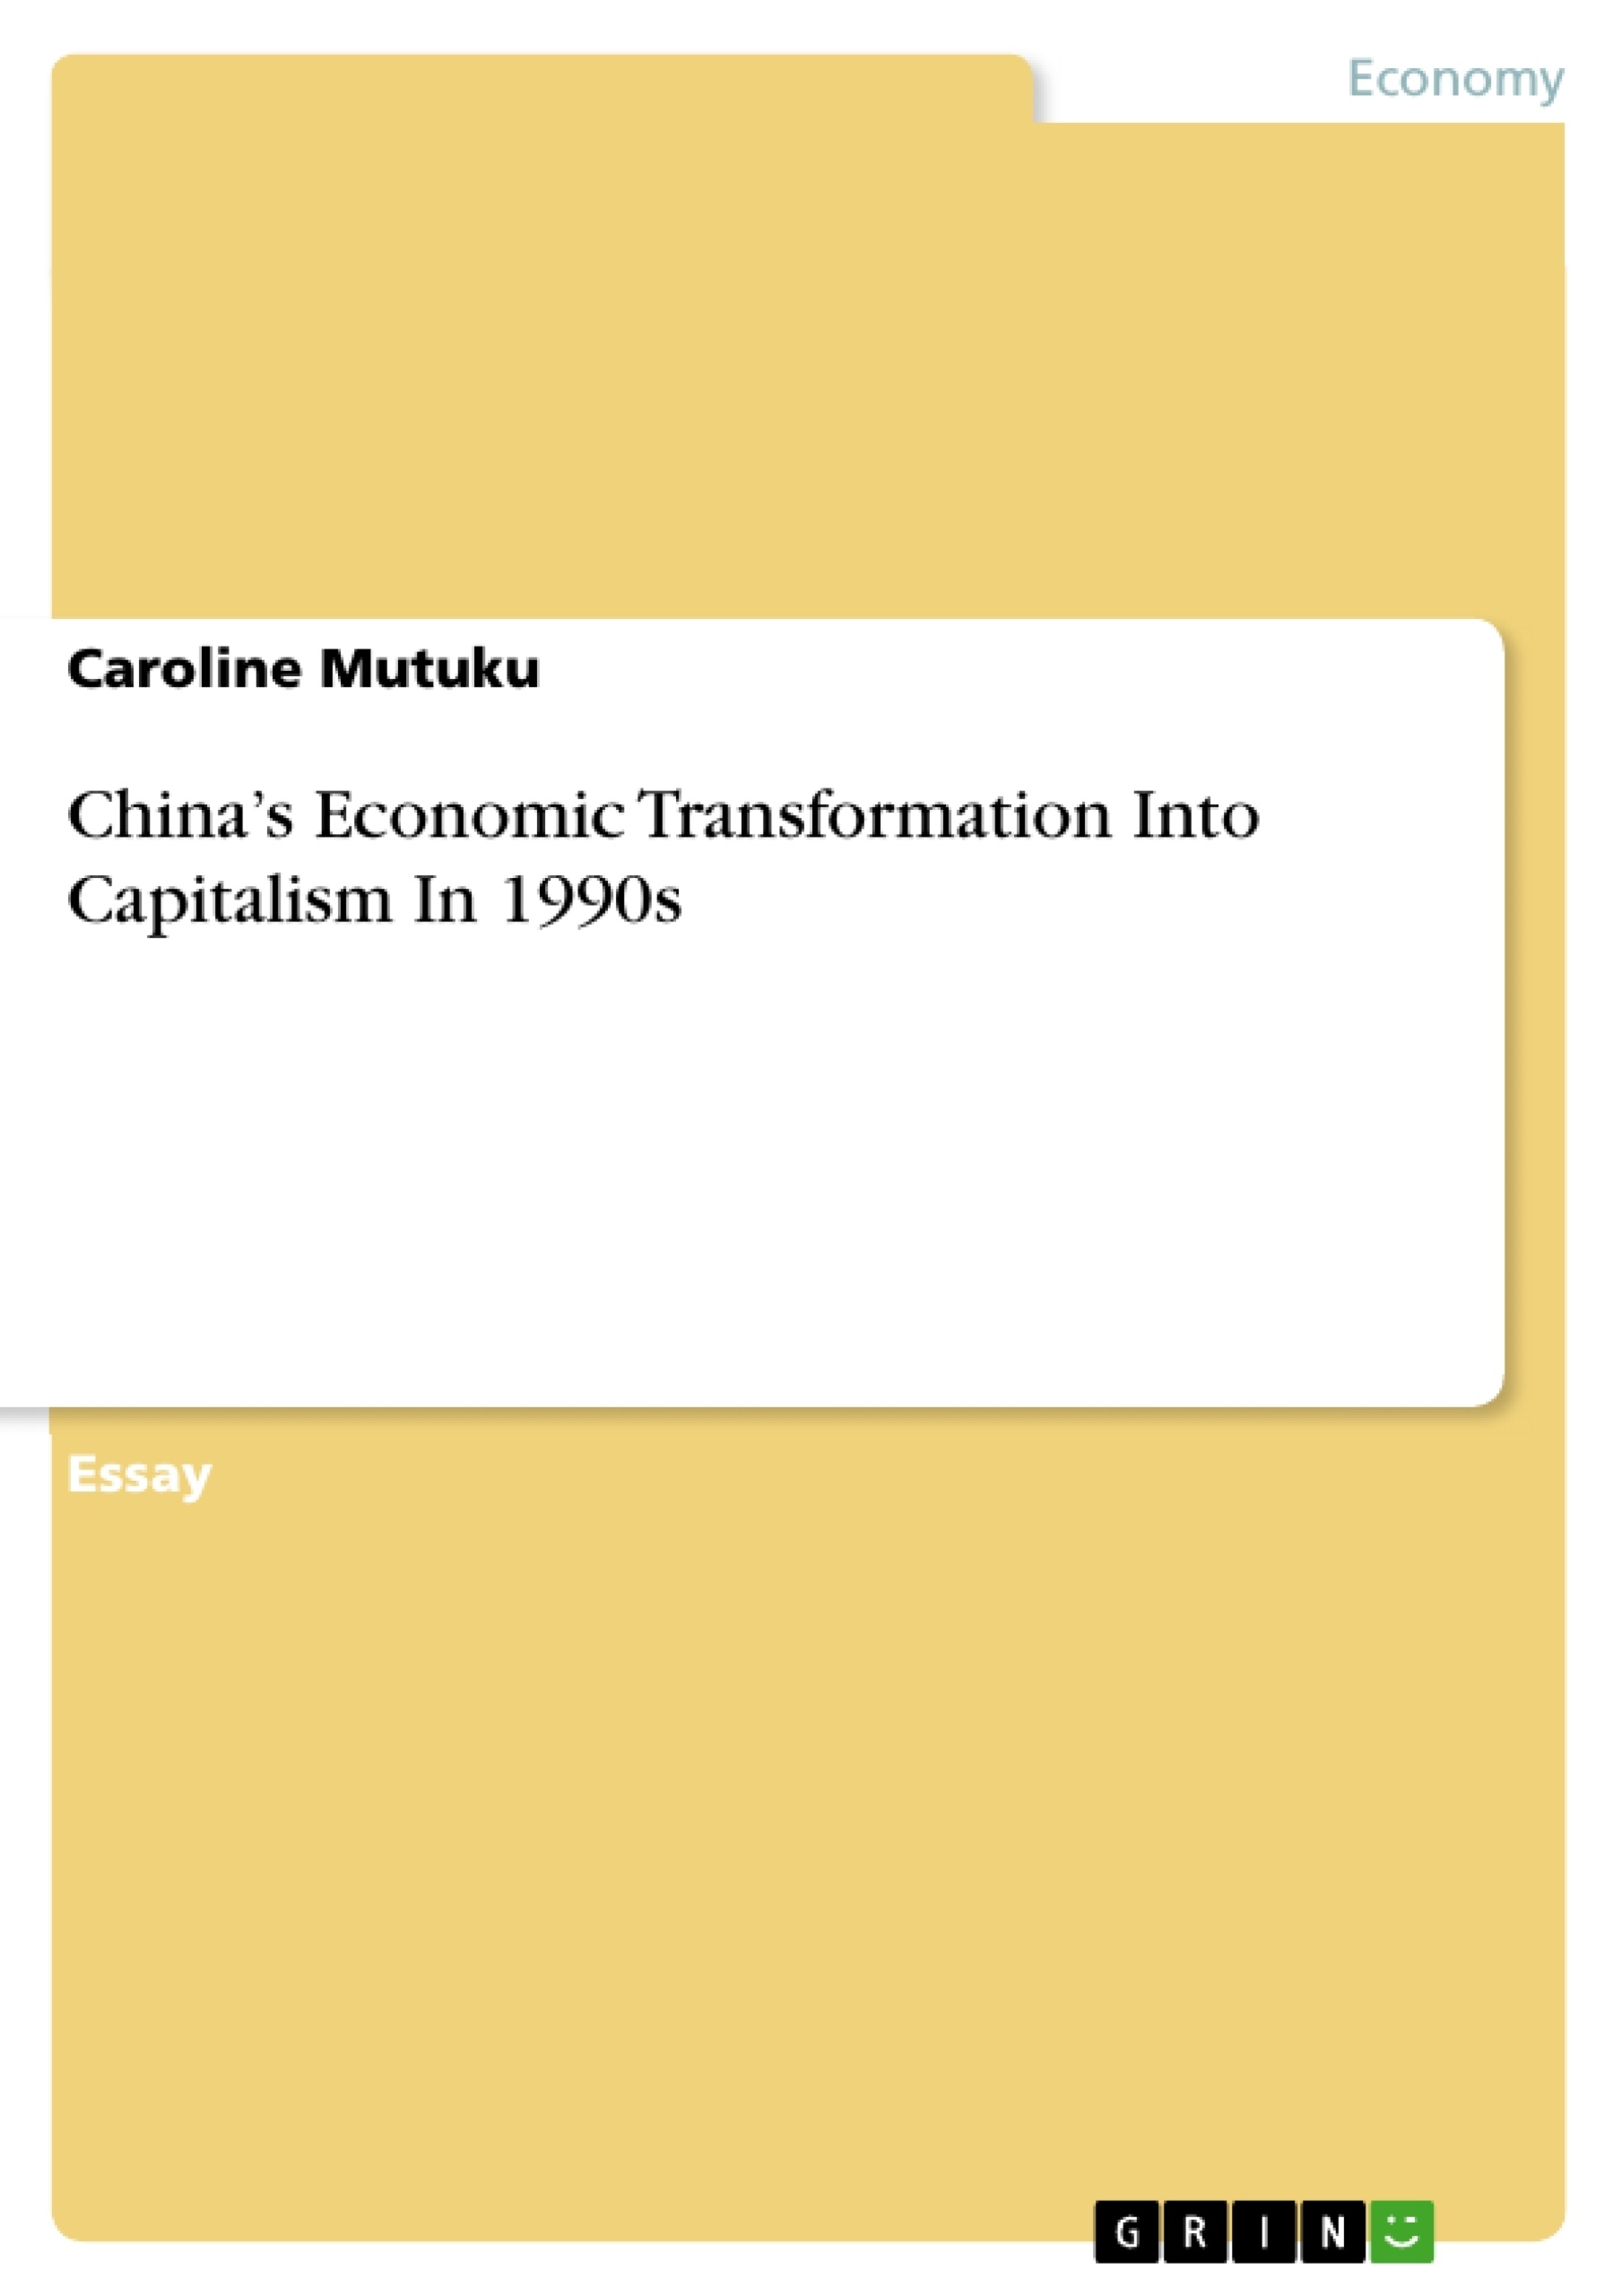 Title: China’s Economic Transformation Into Capitalism In 1990s